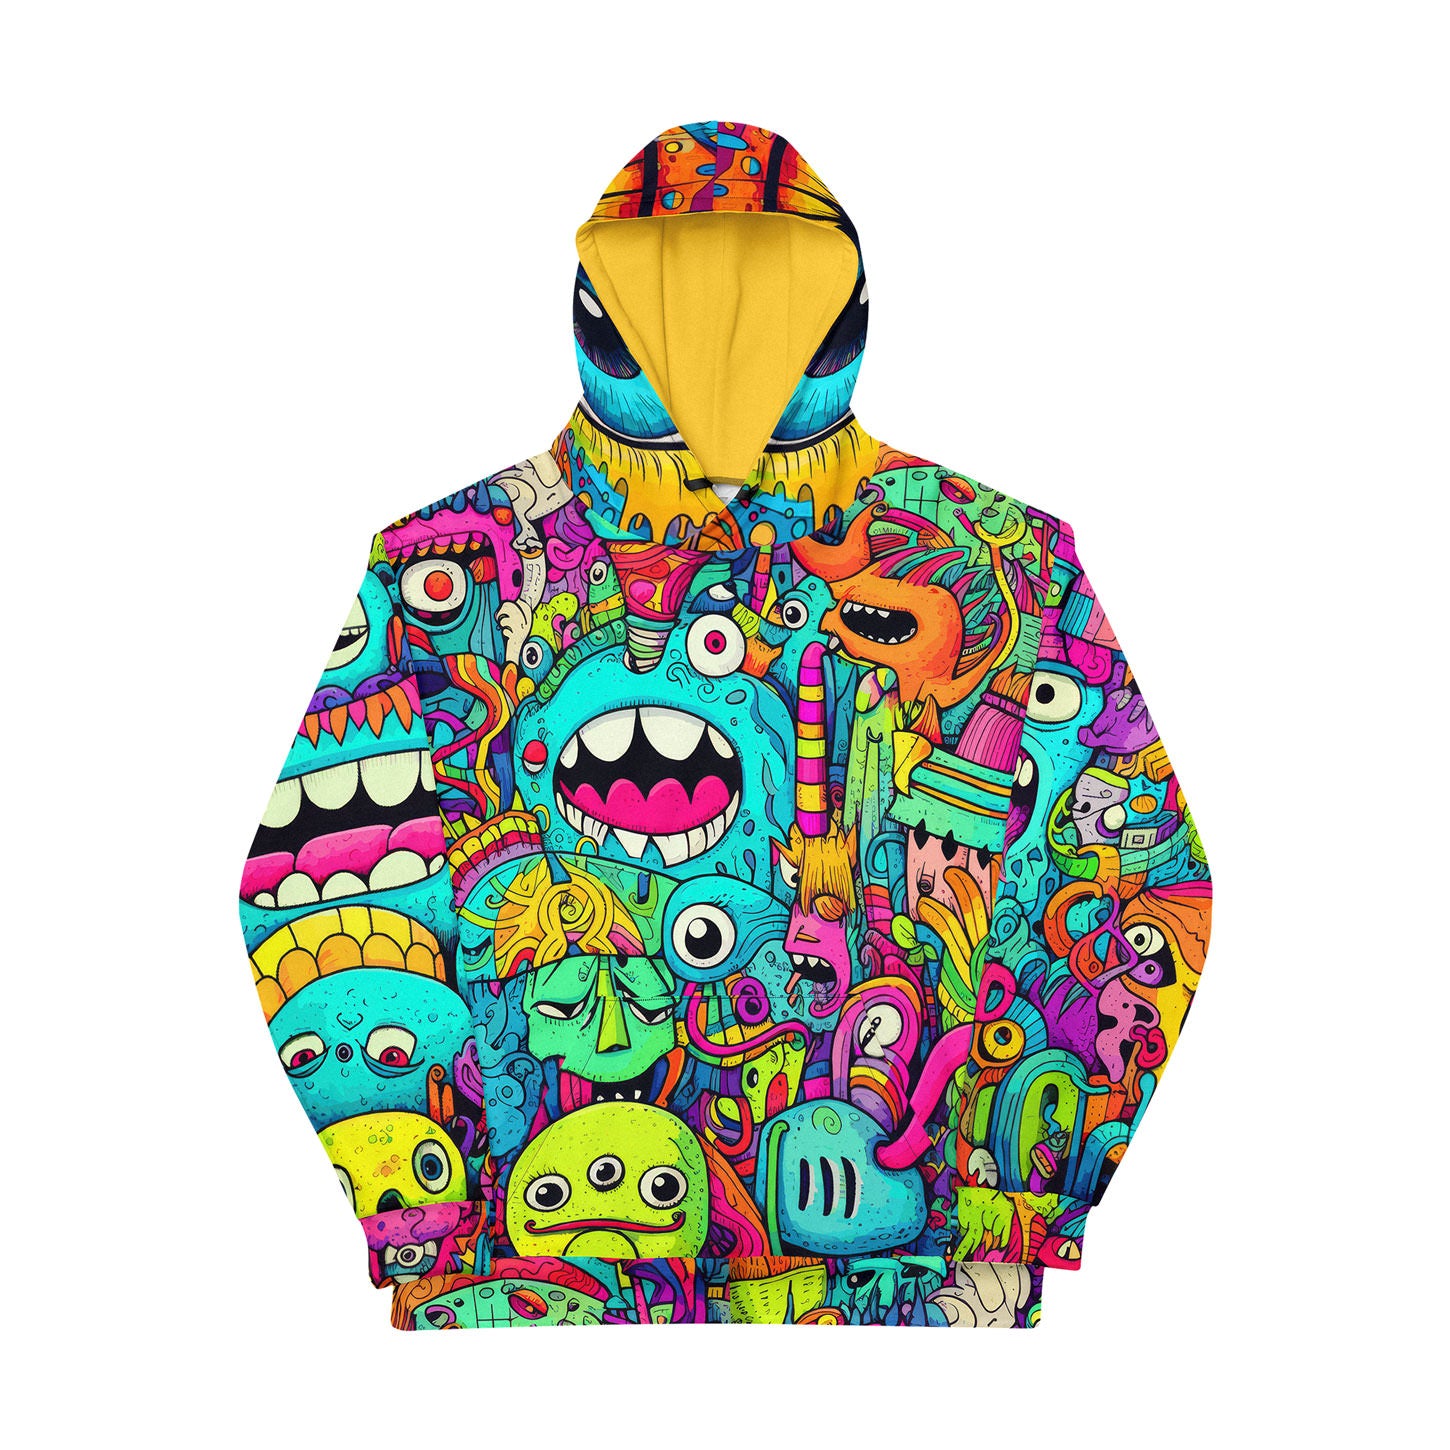 Unisex comfy relaxed fit hoodie has a soft outside with a vibrant print and an even softer brushed fleece inside. Precisely printed, cut & hand sewn.